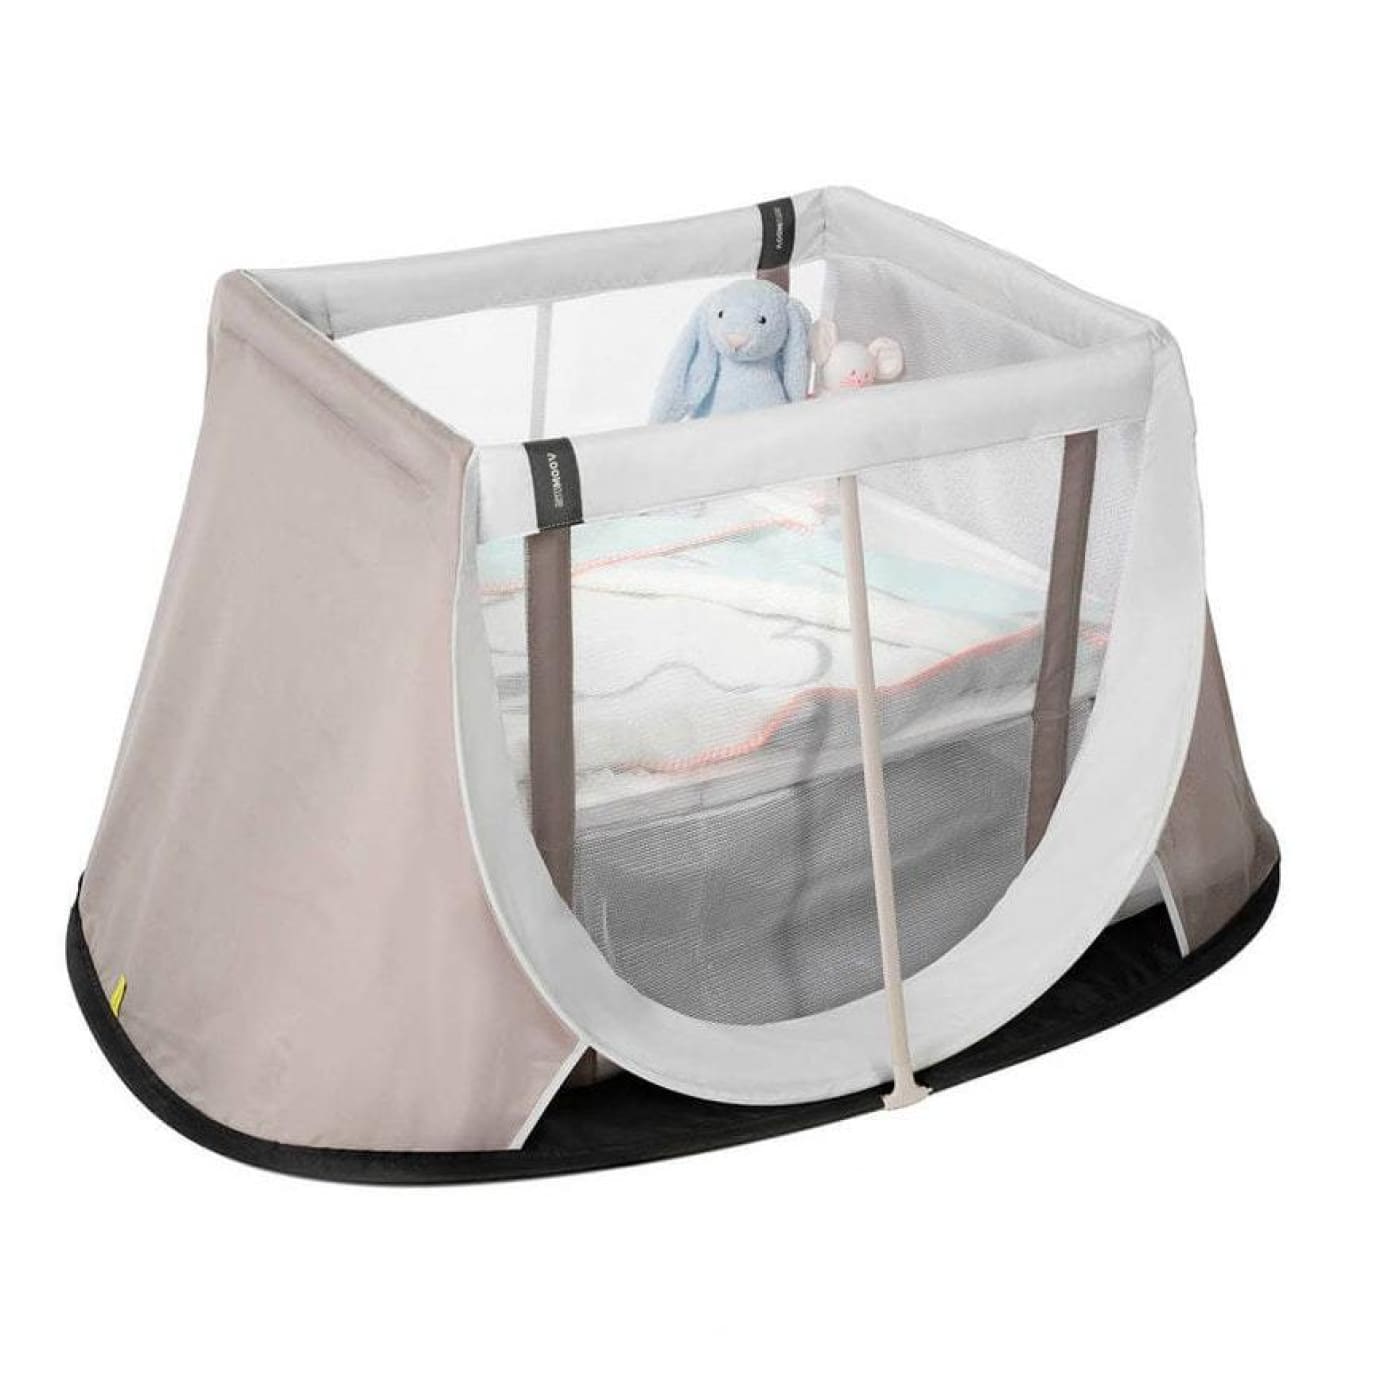 AeroMoov Instant Travel Cot - White Sand - White Sand - ON THE GO - PORTACOTS/ACCESSORIES